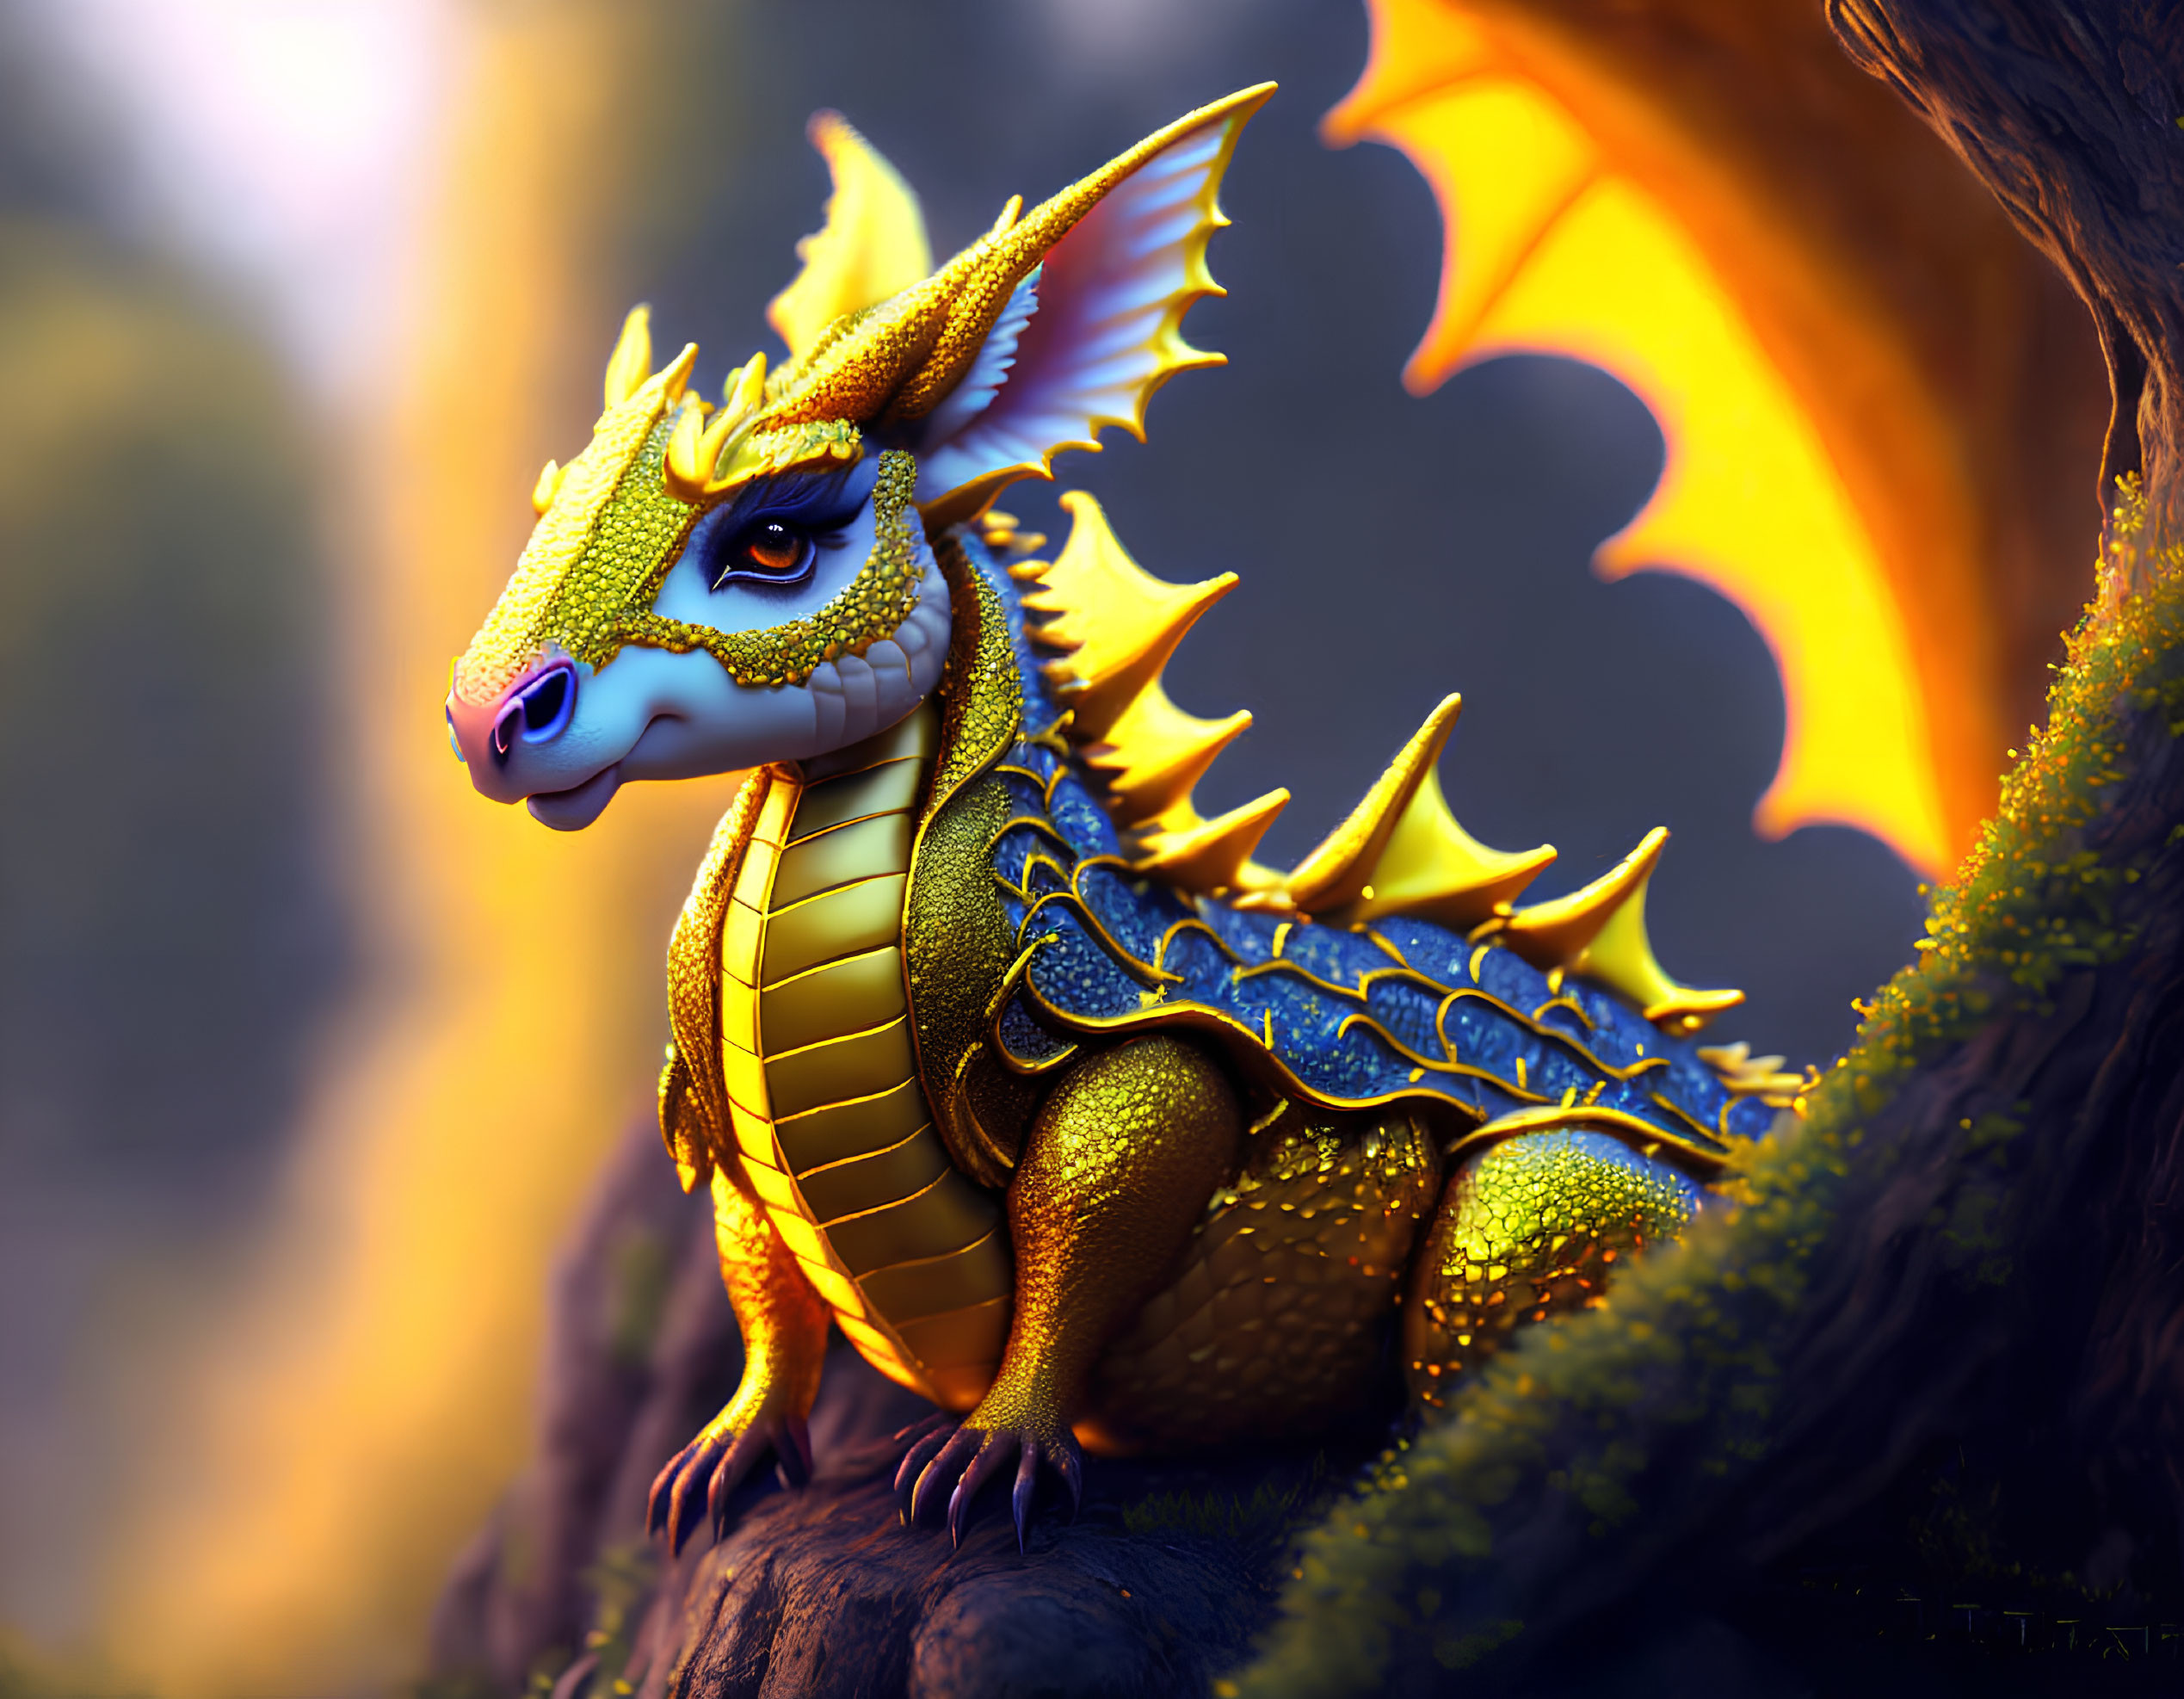 Golden dragon with orange wings perched on tree in mystical forest